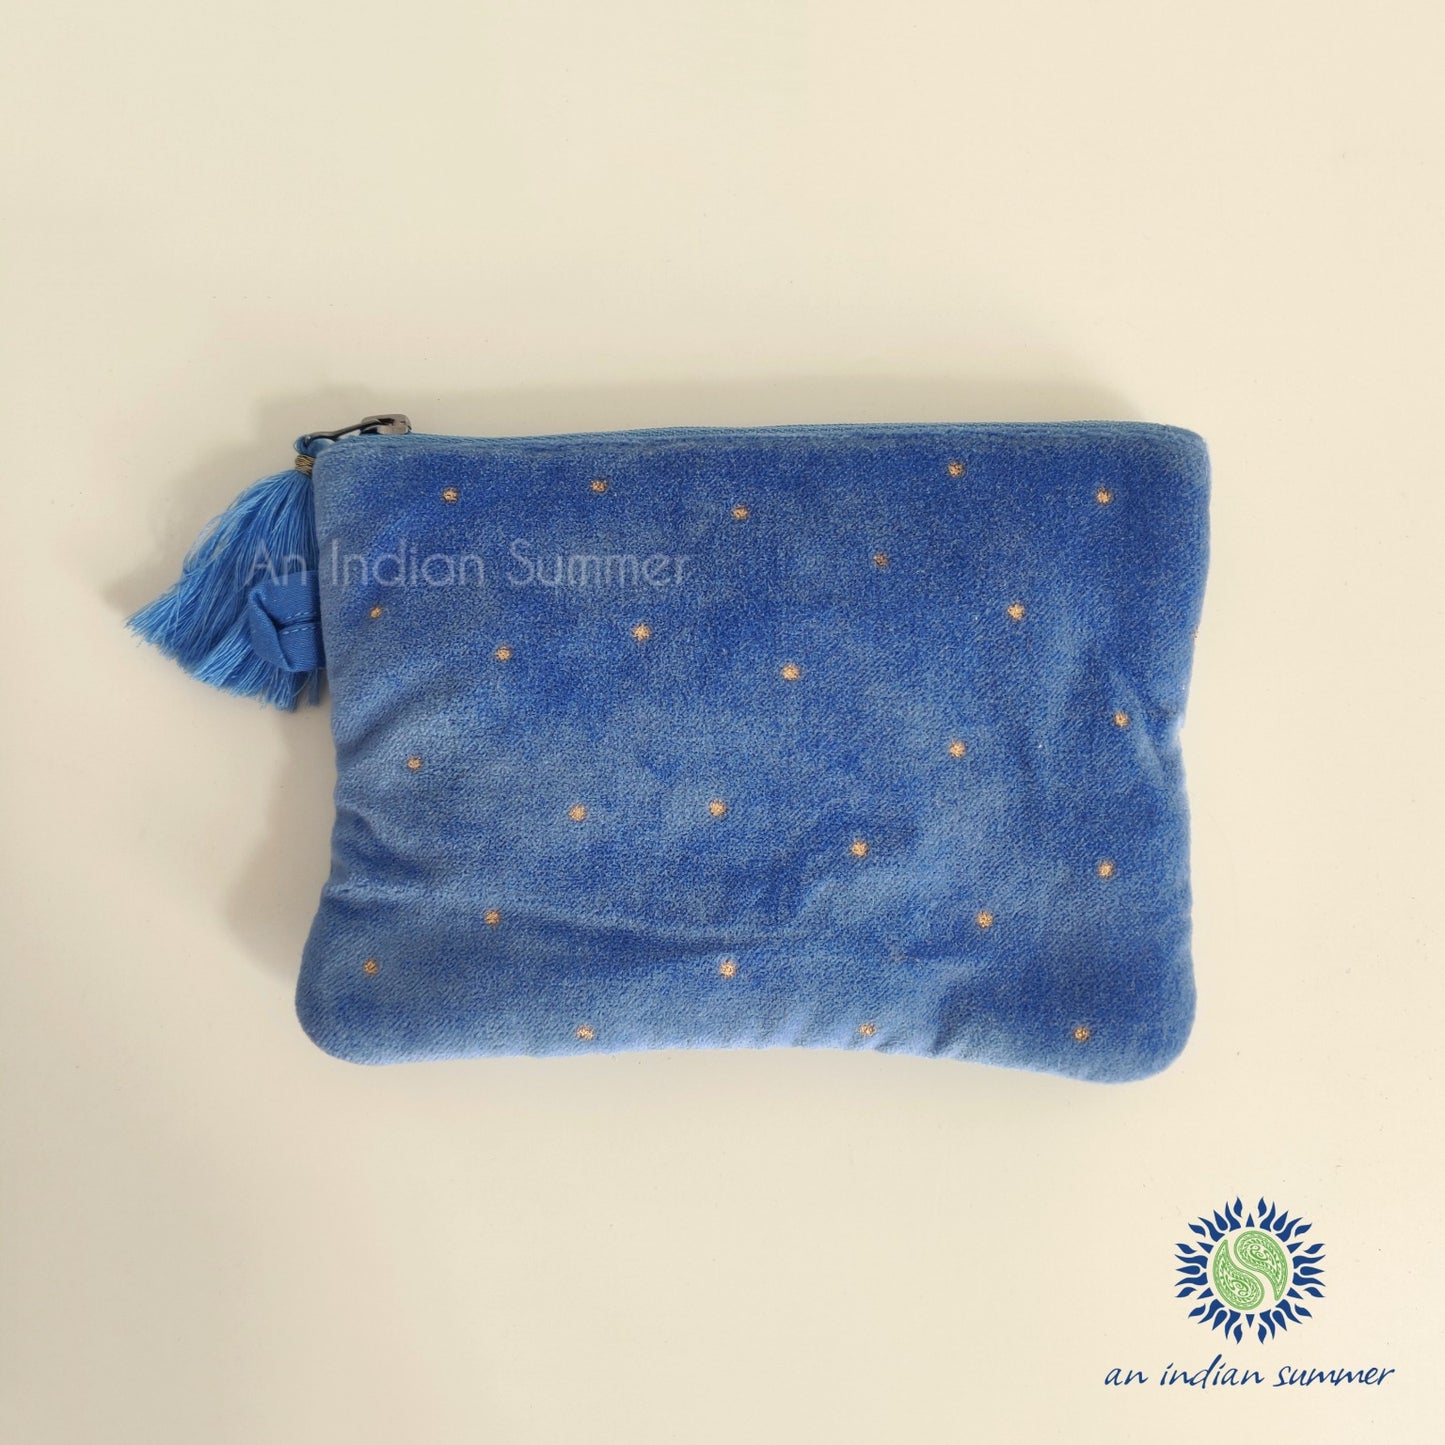 Velvet Purse | Powder Blue with Gold Stars | Cotton Velvet | An Indian Summer | Seasonless Timeless Sustainable Ethical Authentic Artisan Conscious Clothing Lifestyle Brand